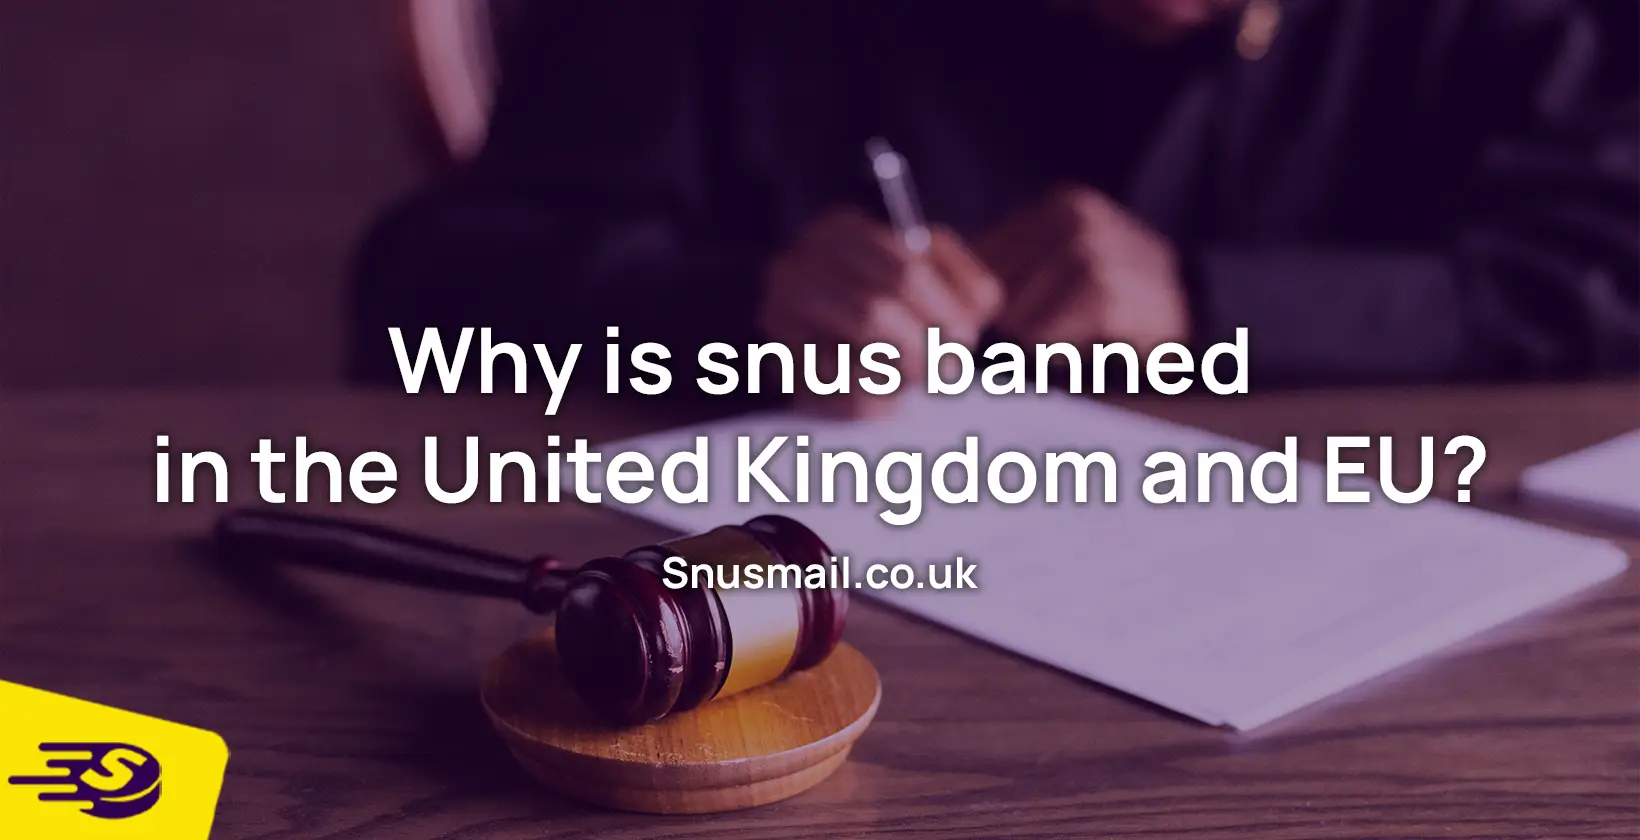 Why is snus banner in the uk and eu